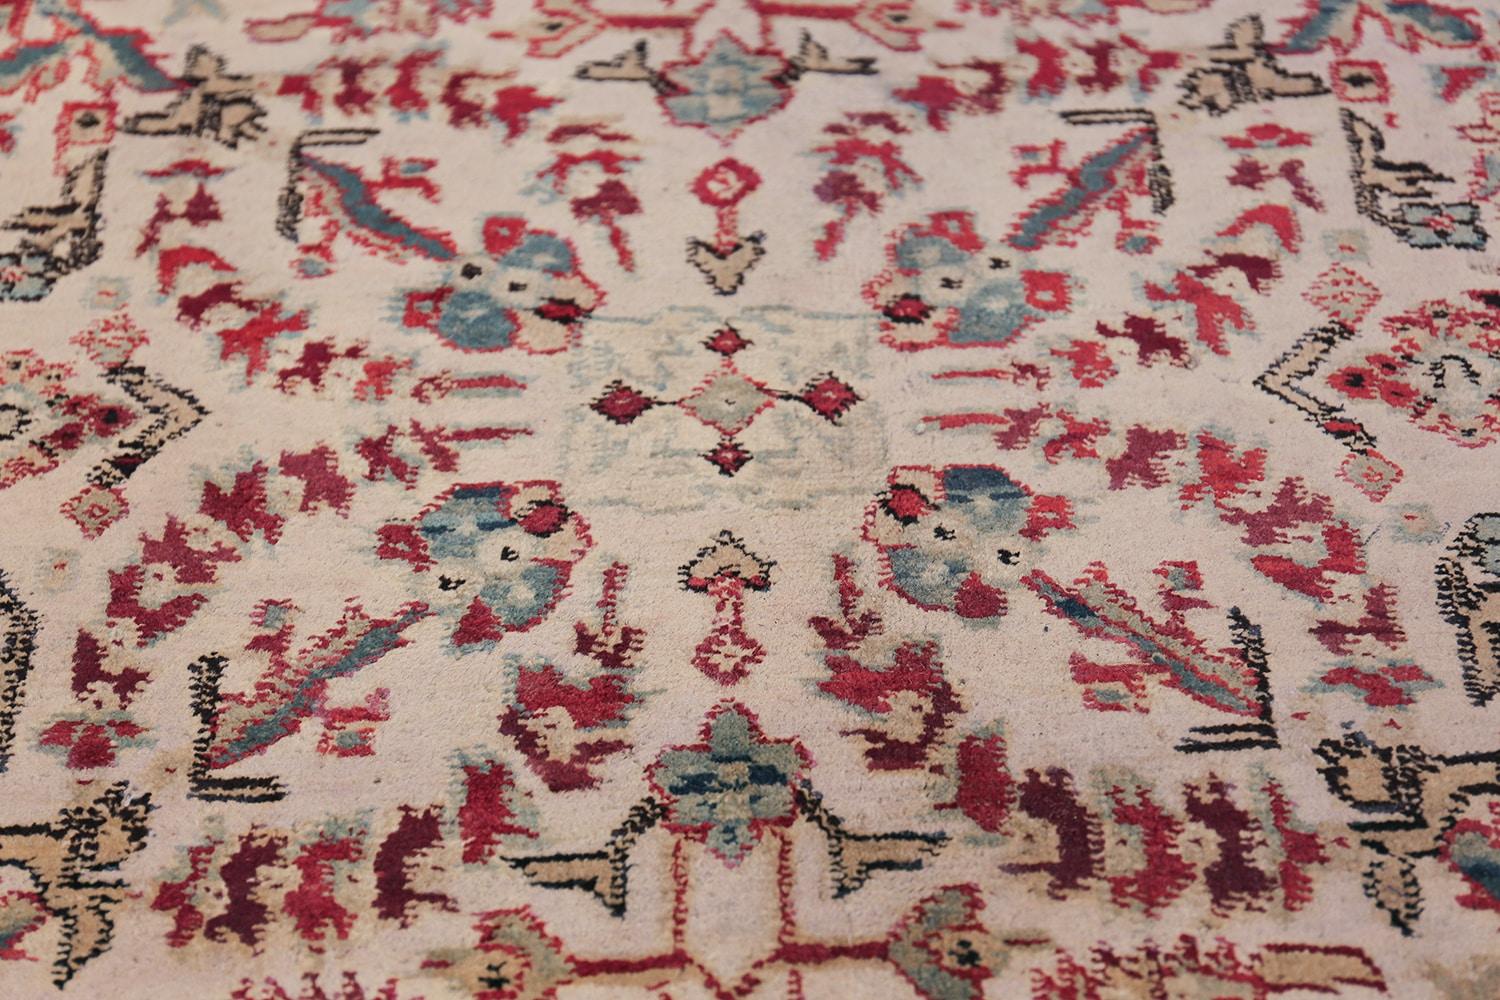 Antique Indian Agra rug, India, 1900. Size: 7 ft 5 in x 9 ft 9 in (2.26 m x 2.97 m). 